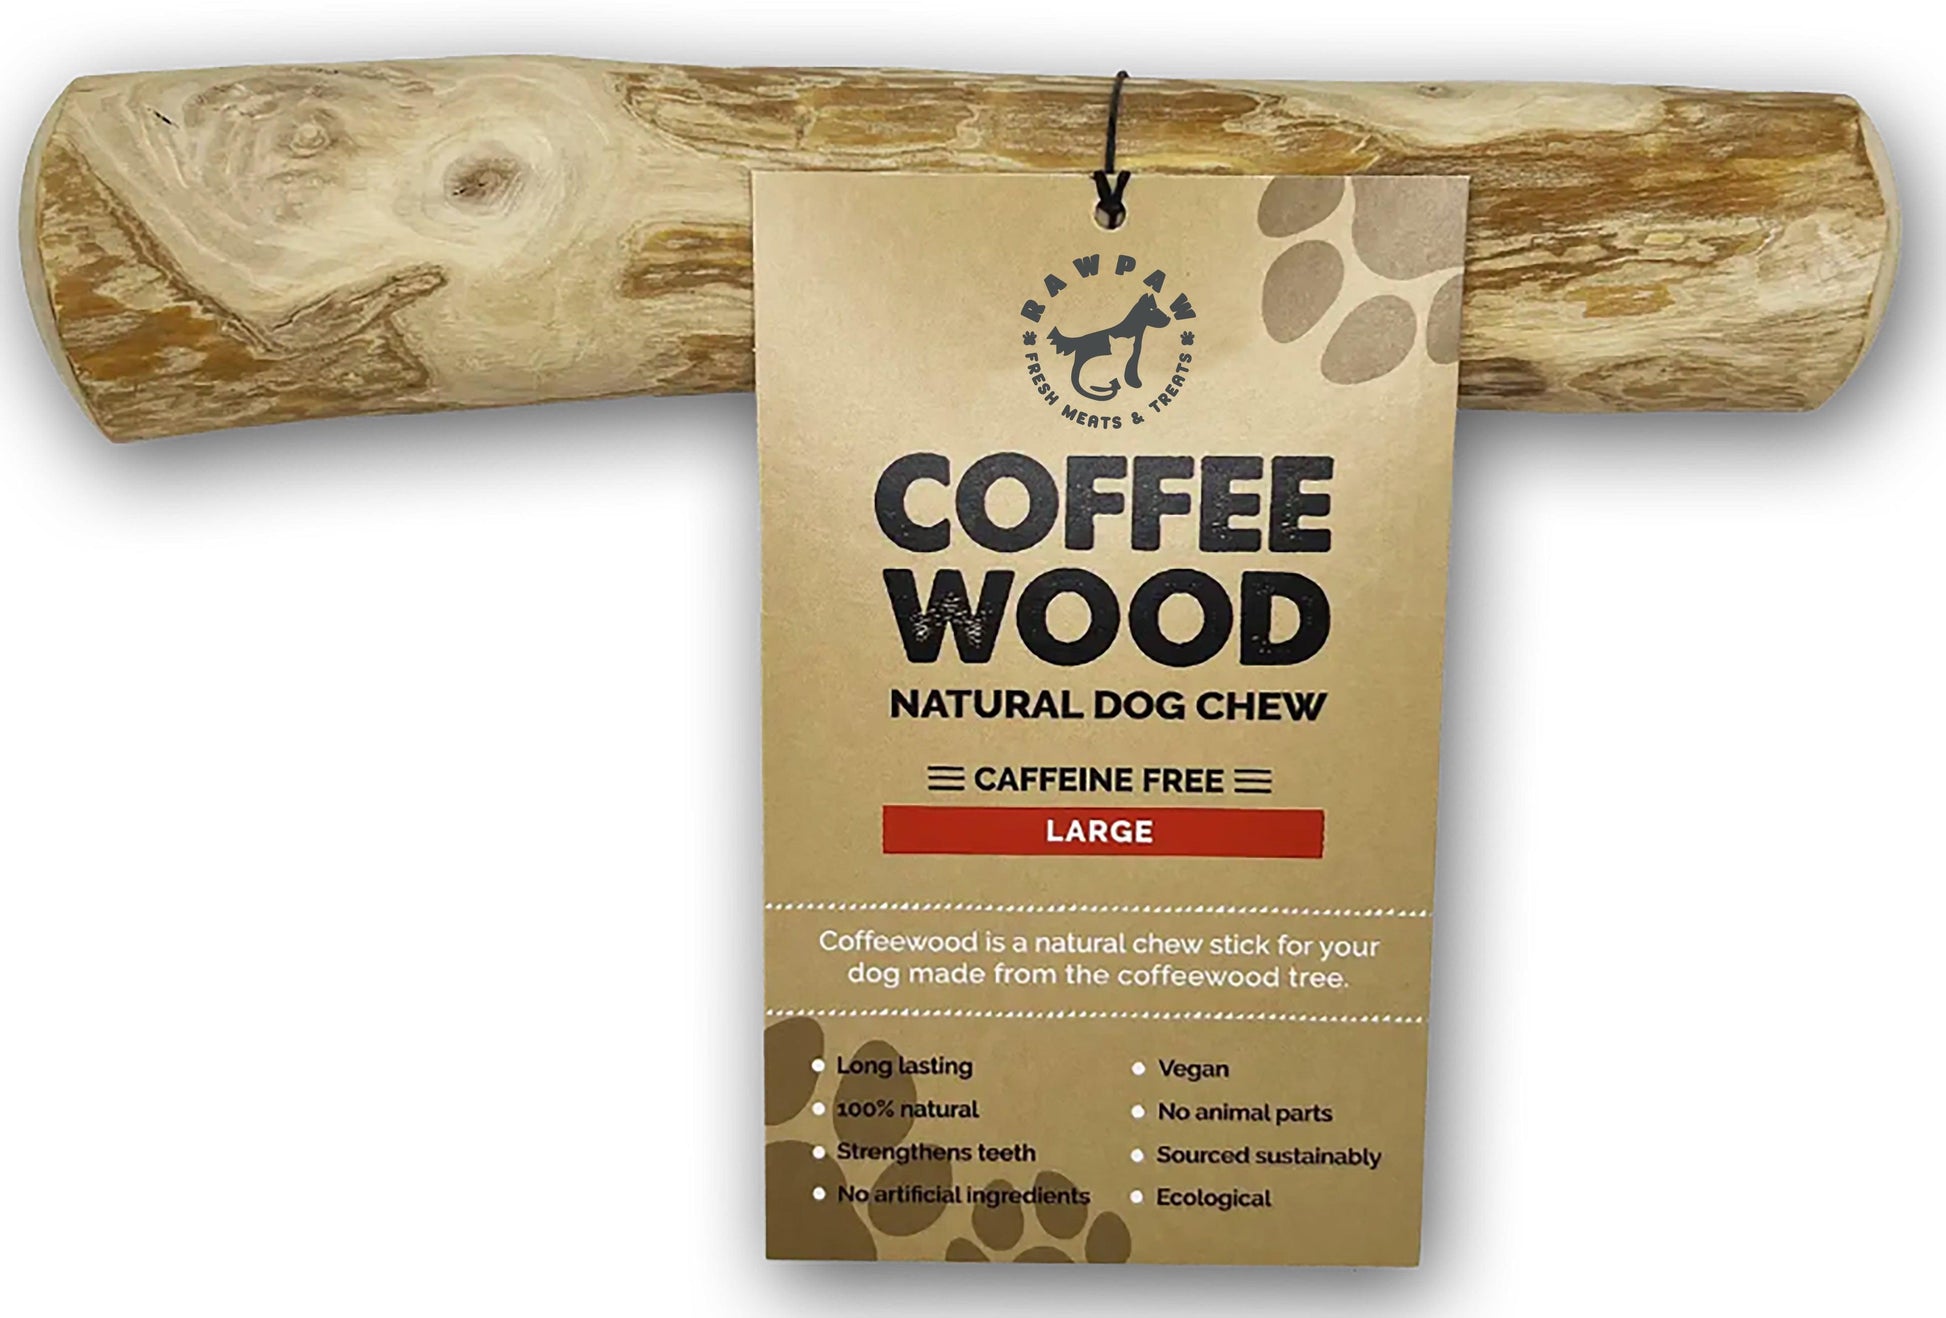 "Exotic Coffee Wood Dog Chews: Sustainable, Natural, and Long-Lasting Delights for Your Furry Friends!" - Raw Paw